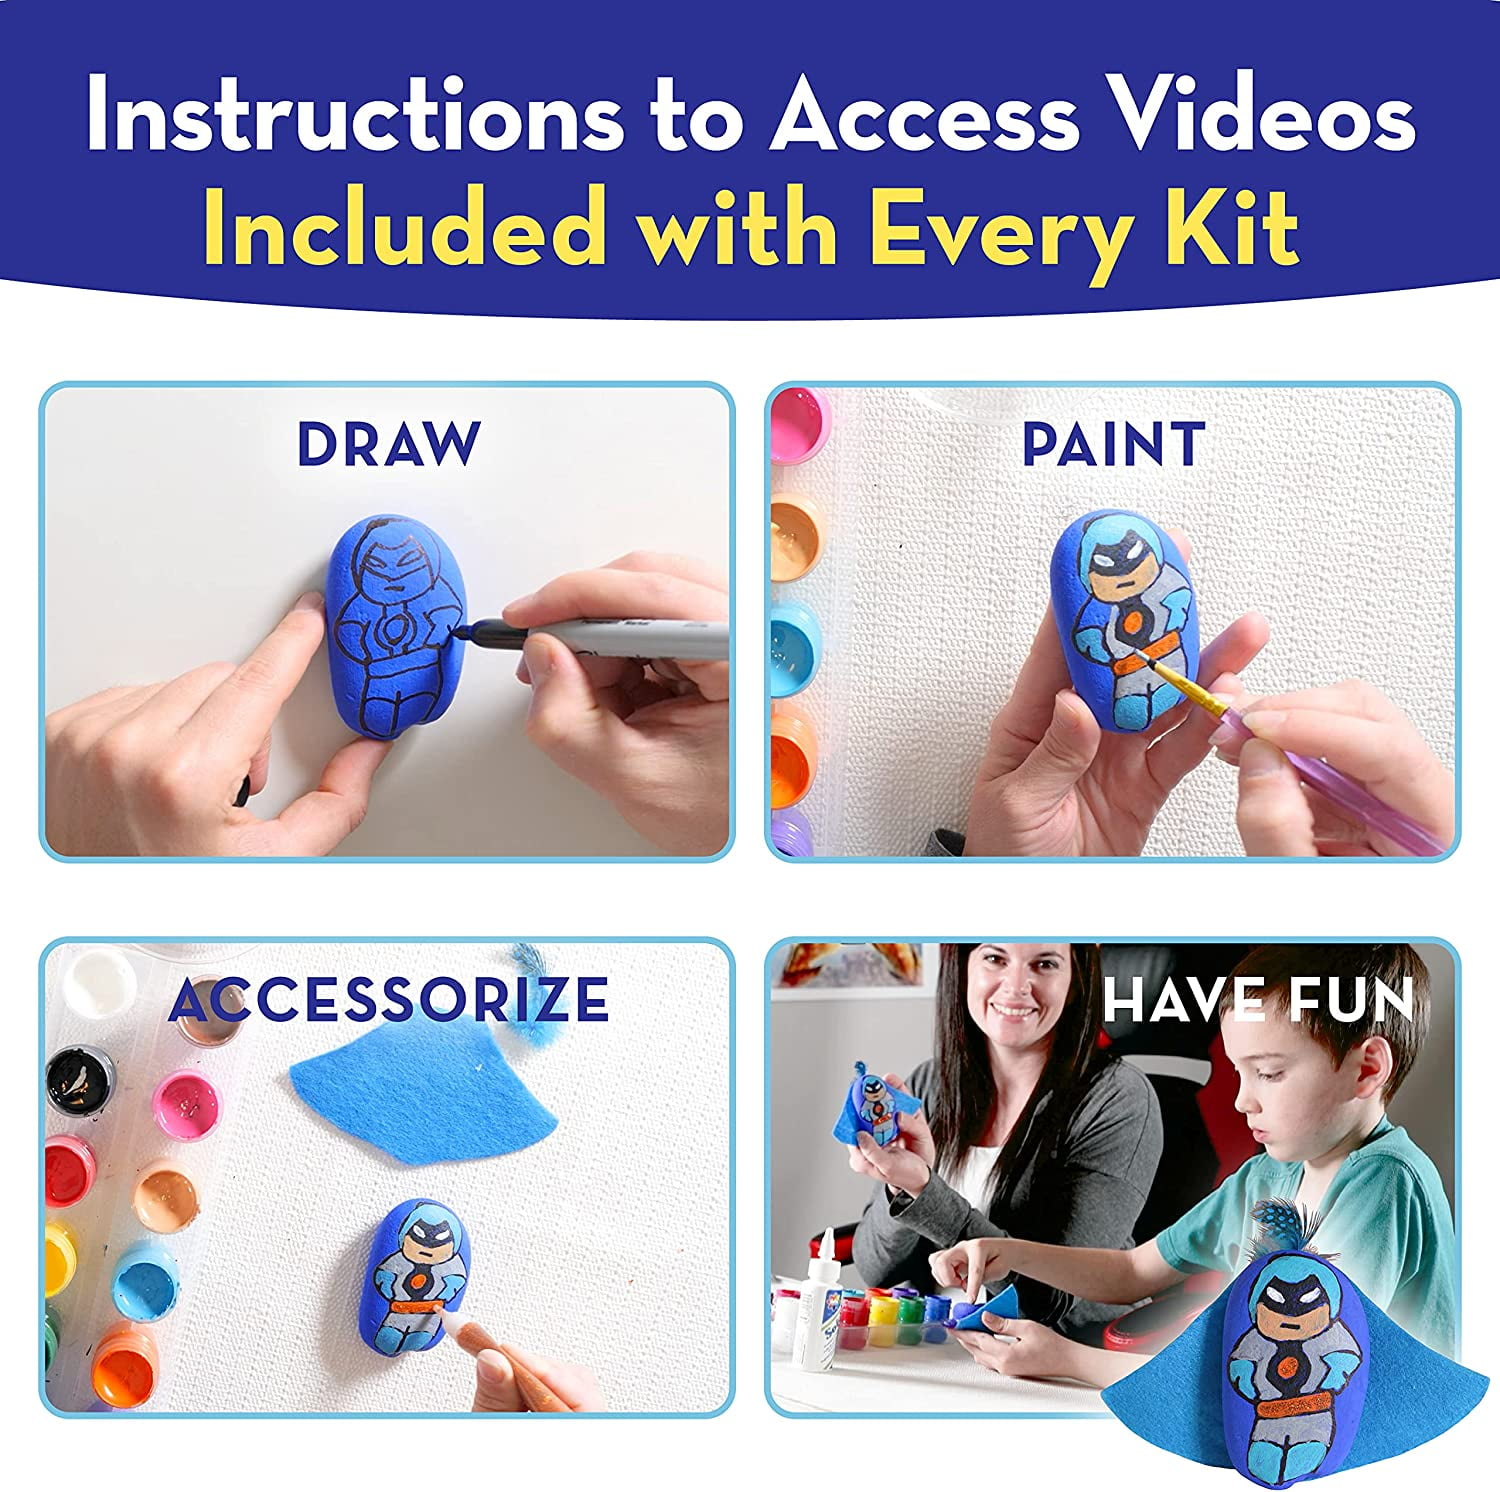 BRYTE 150+ Piece Deluxe Edition All-Inclusive Kids Rock Painting Kit, 10  Rocks, 8 Waterproof Paints, Glitter Glue & More